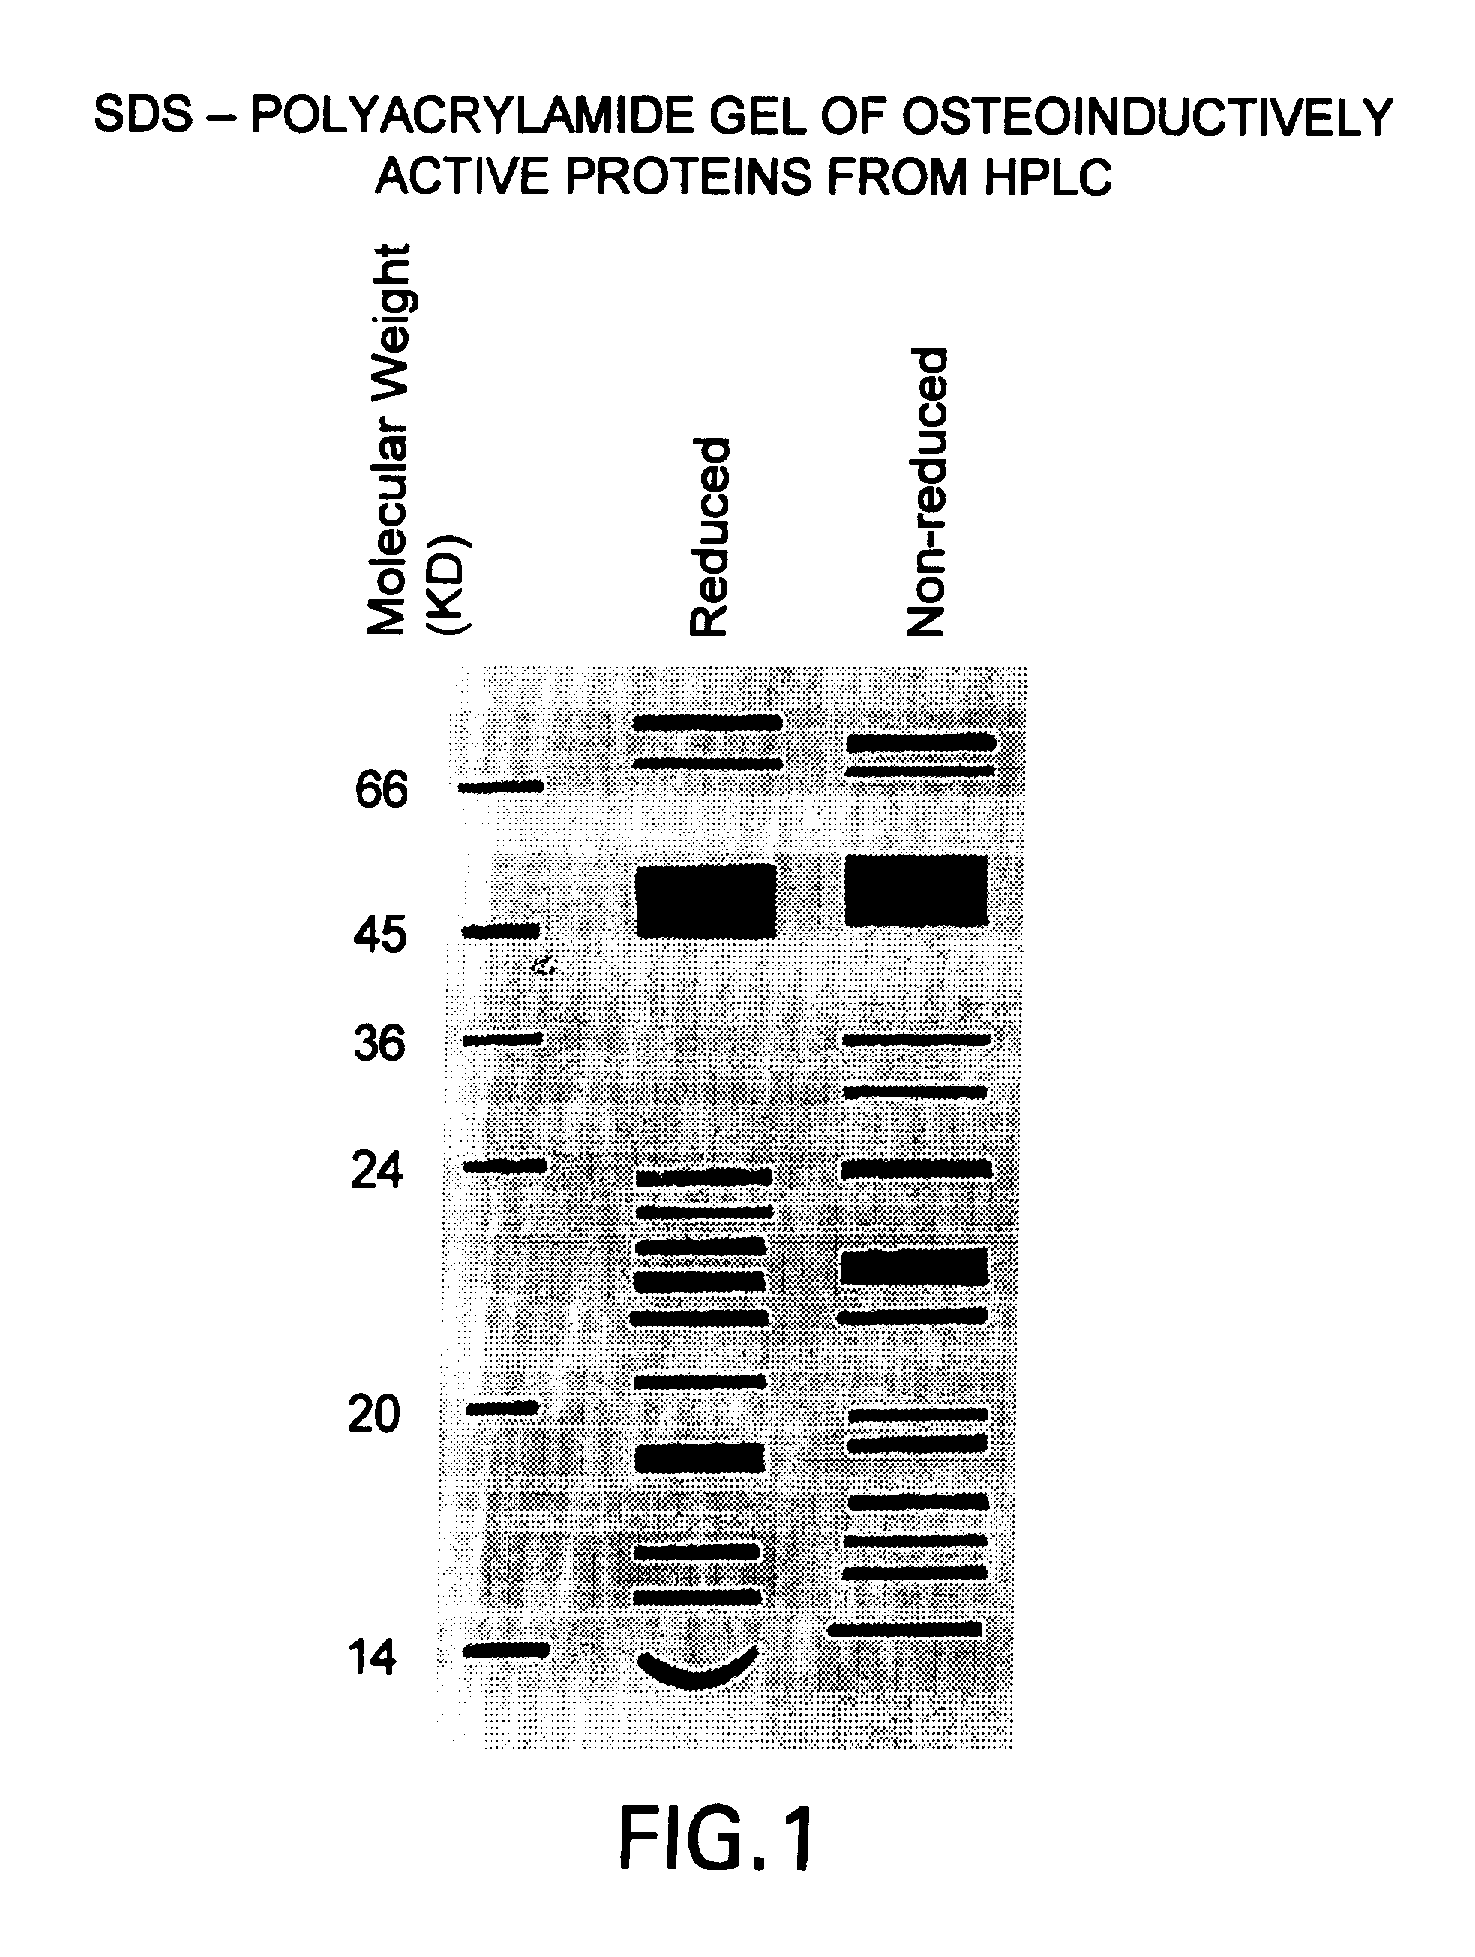 Method of promoting natural bypass